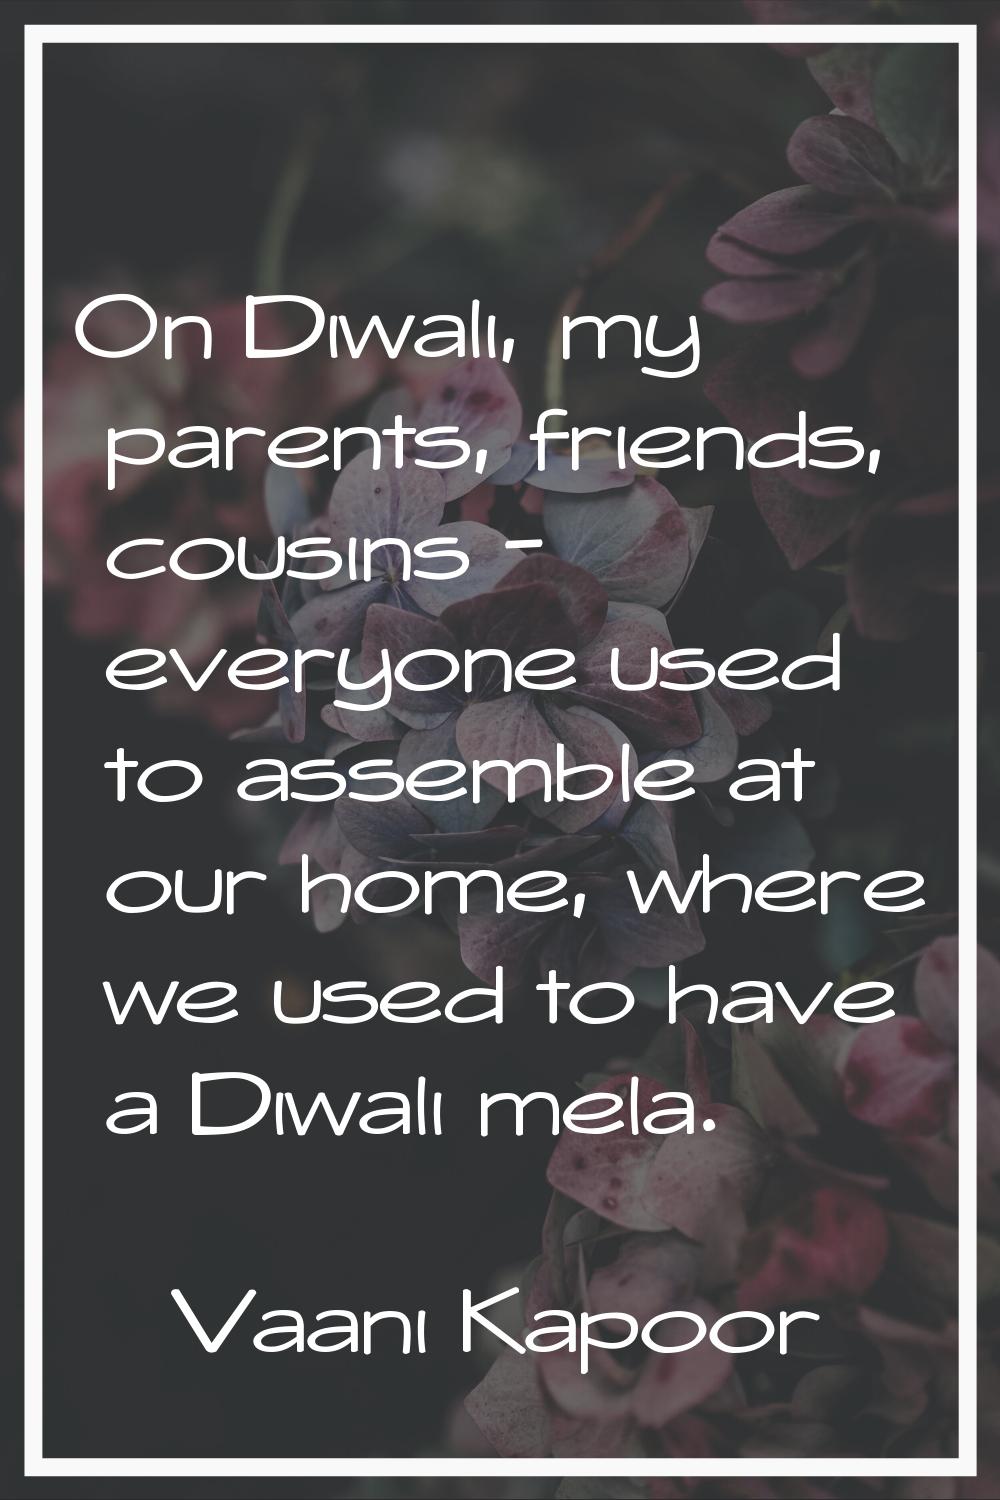 On Diwali, my parents, friends, cousins - everyone used to assemble at our home, where we used to h